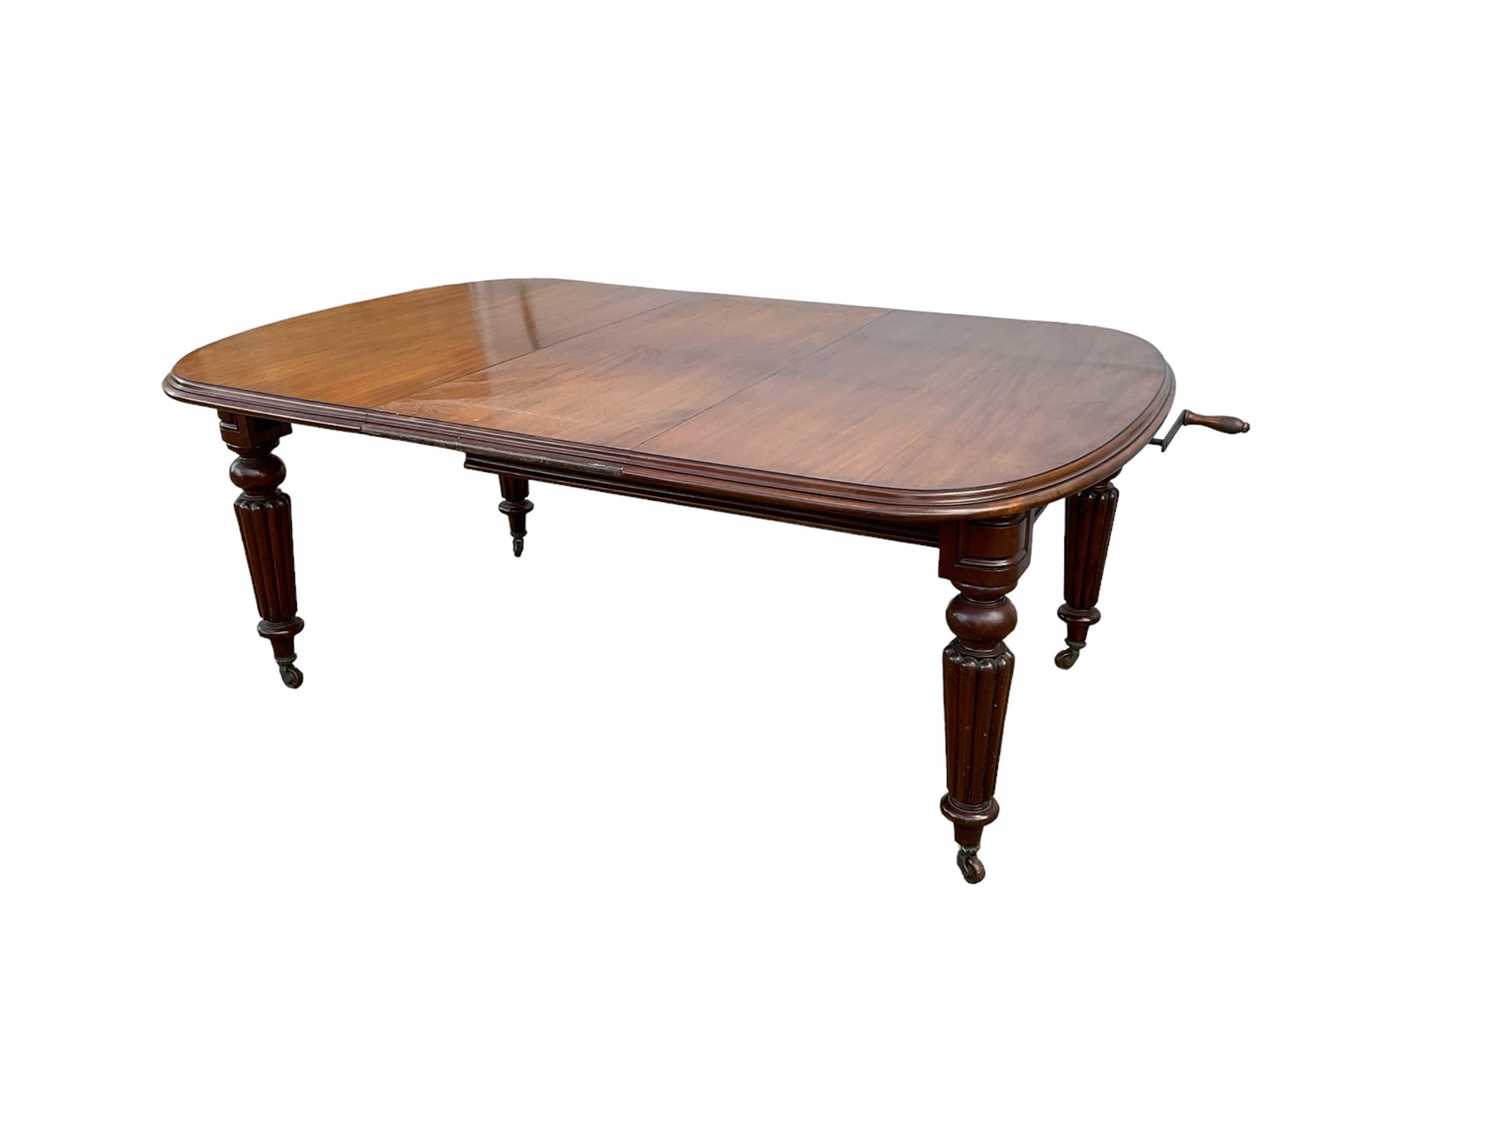 Victorian mahogany extending dining table with extra leaf on turned and reeded legs with winding han